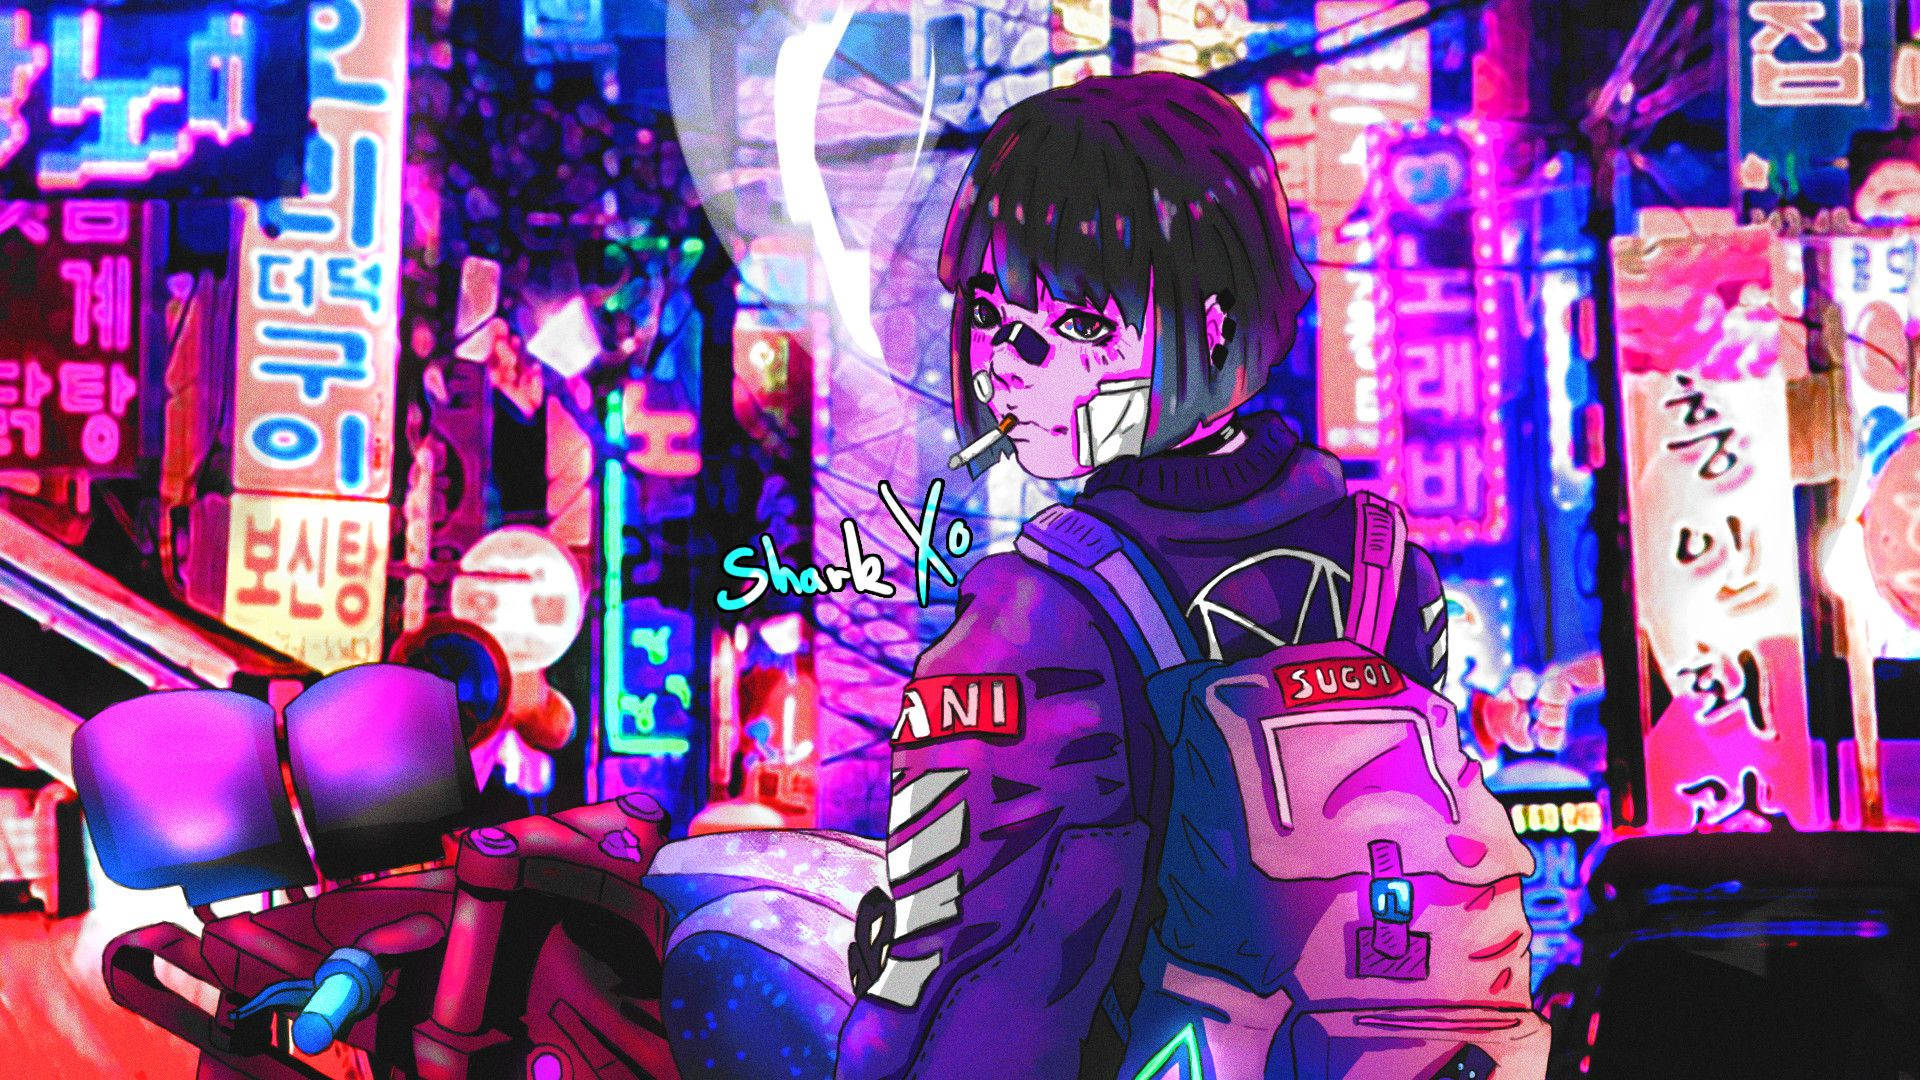 Aesthetic Pfp Girl And Neon Signages Wallpaper